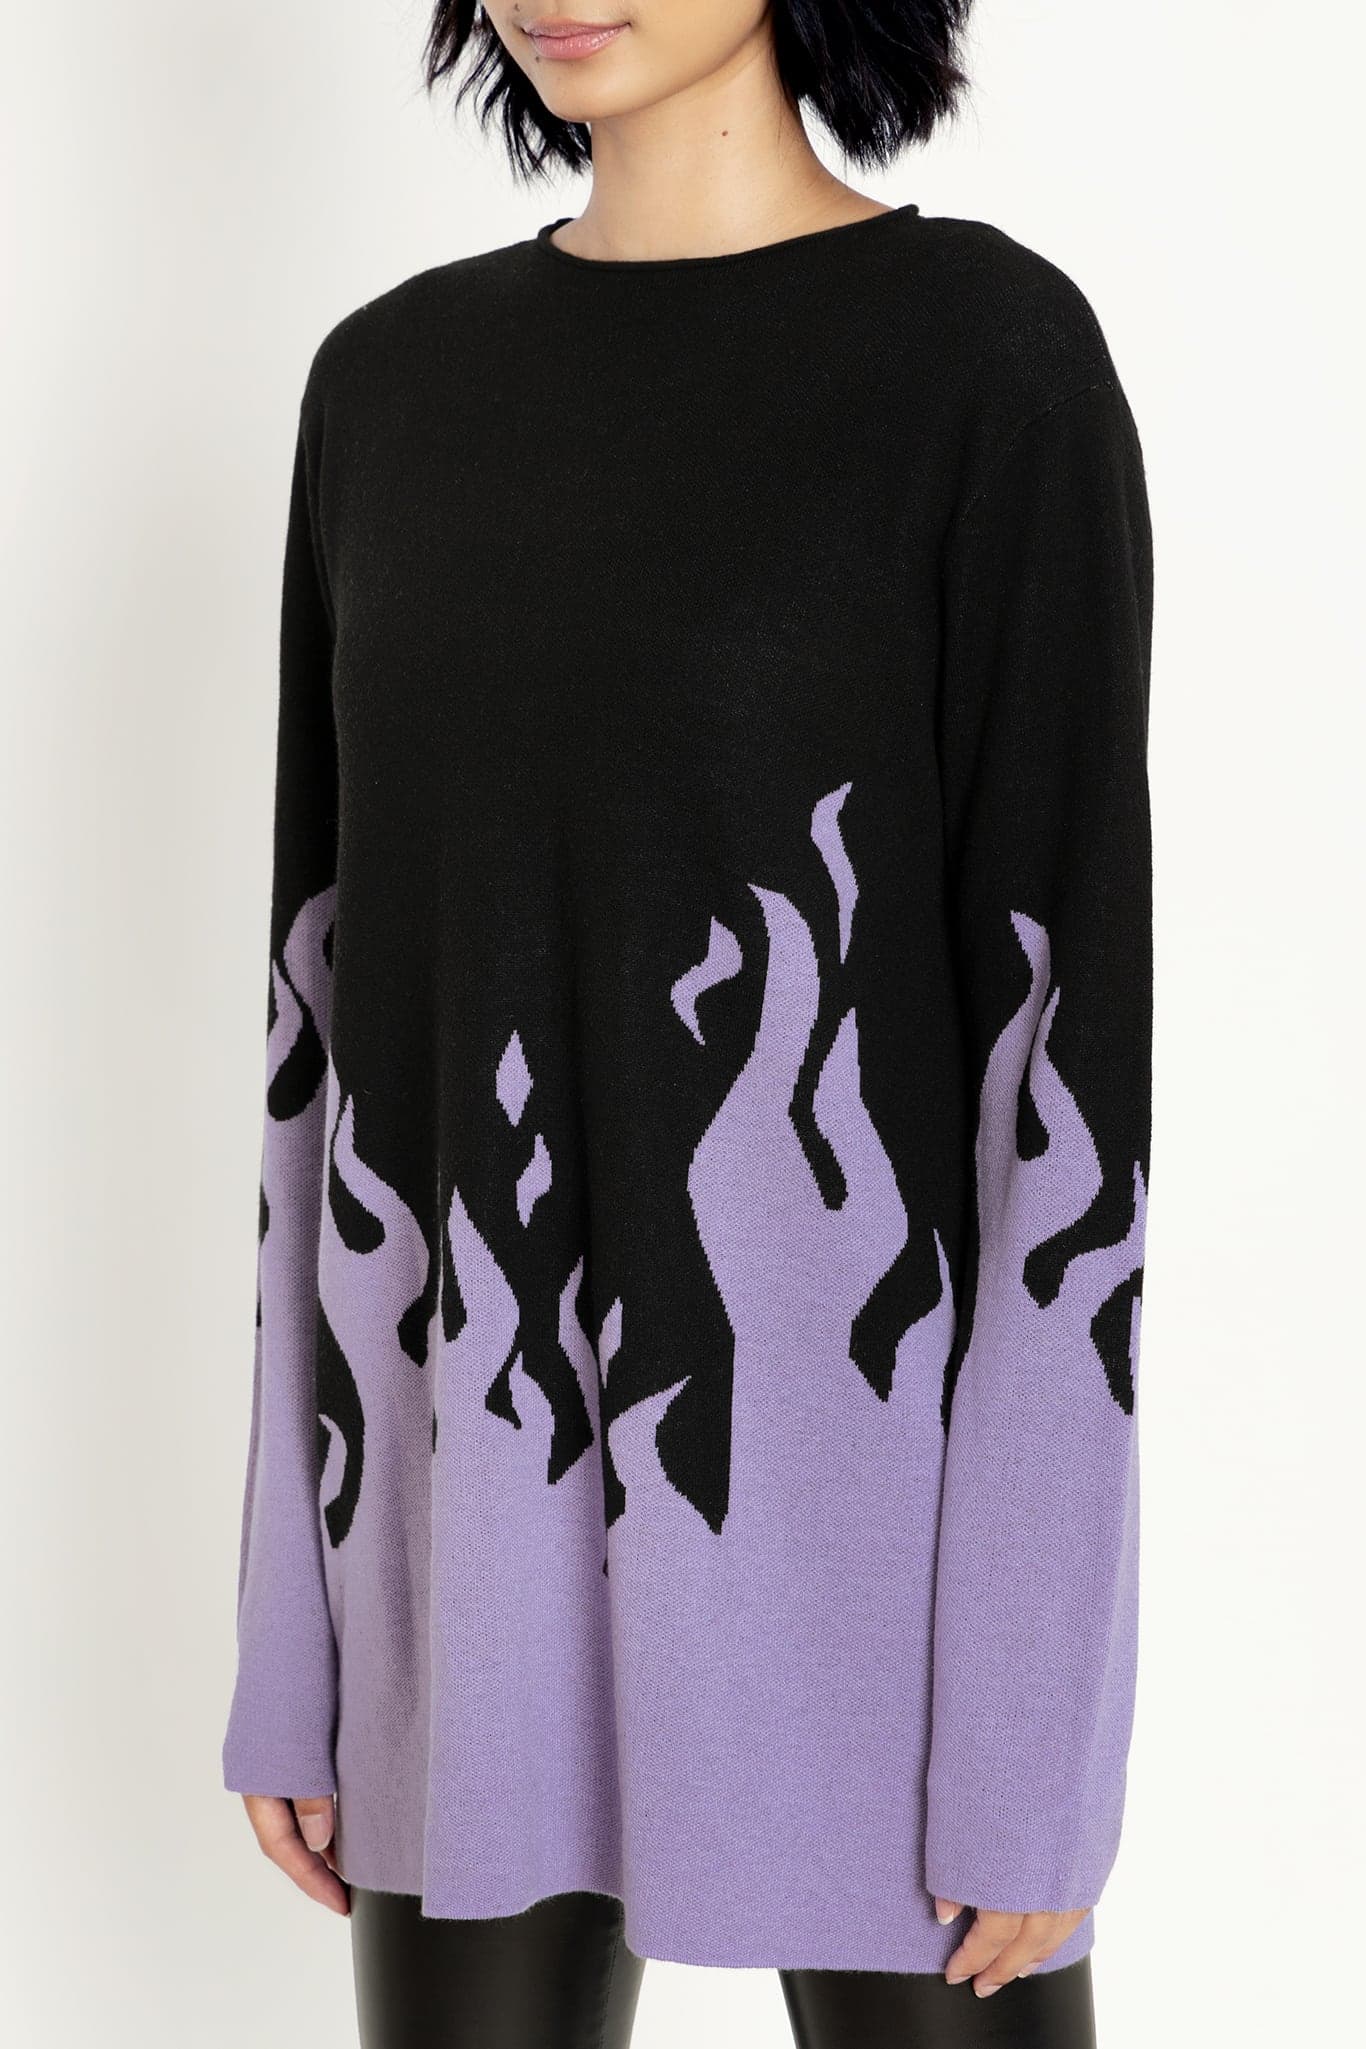 Flaming Purple Oversized Knit Sweater (SECONDS) - Limited